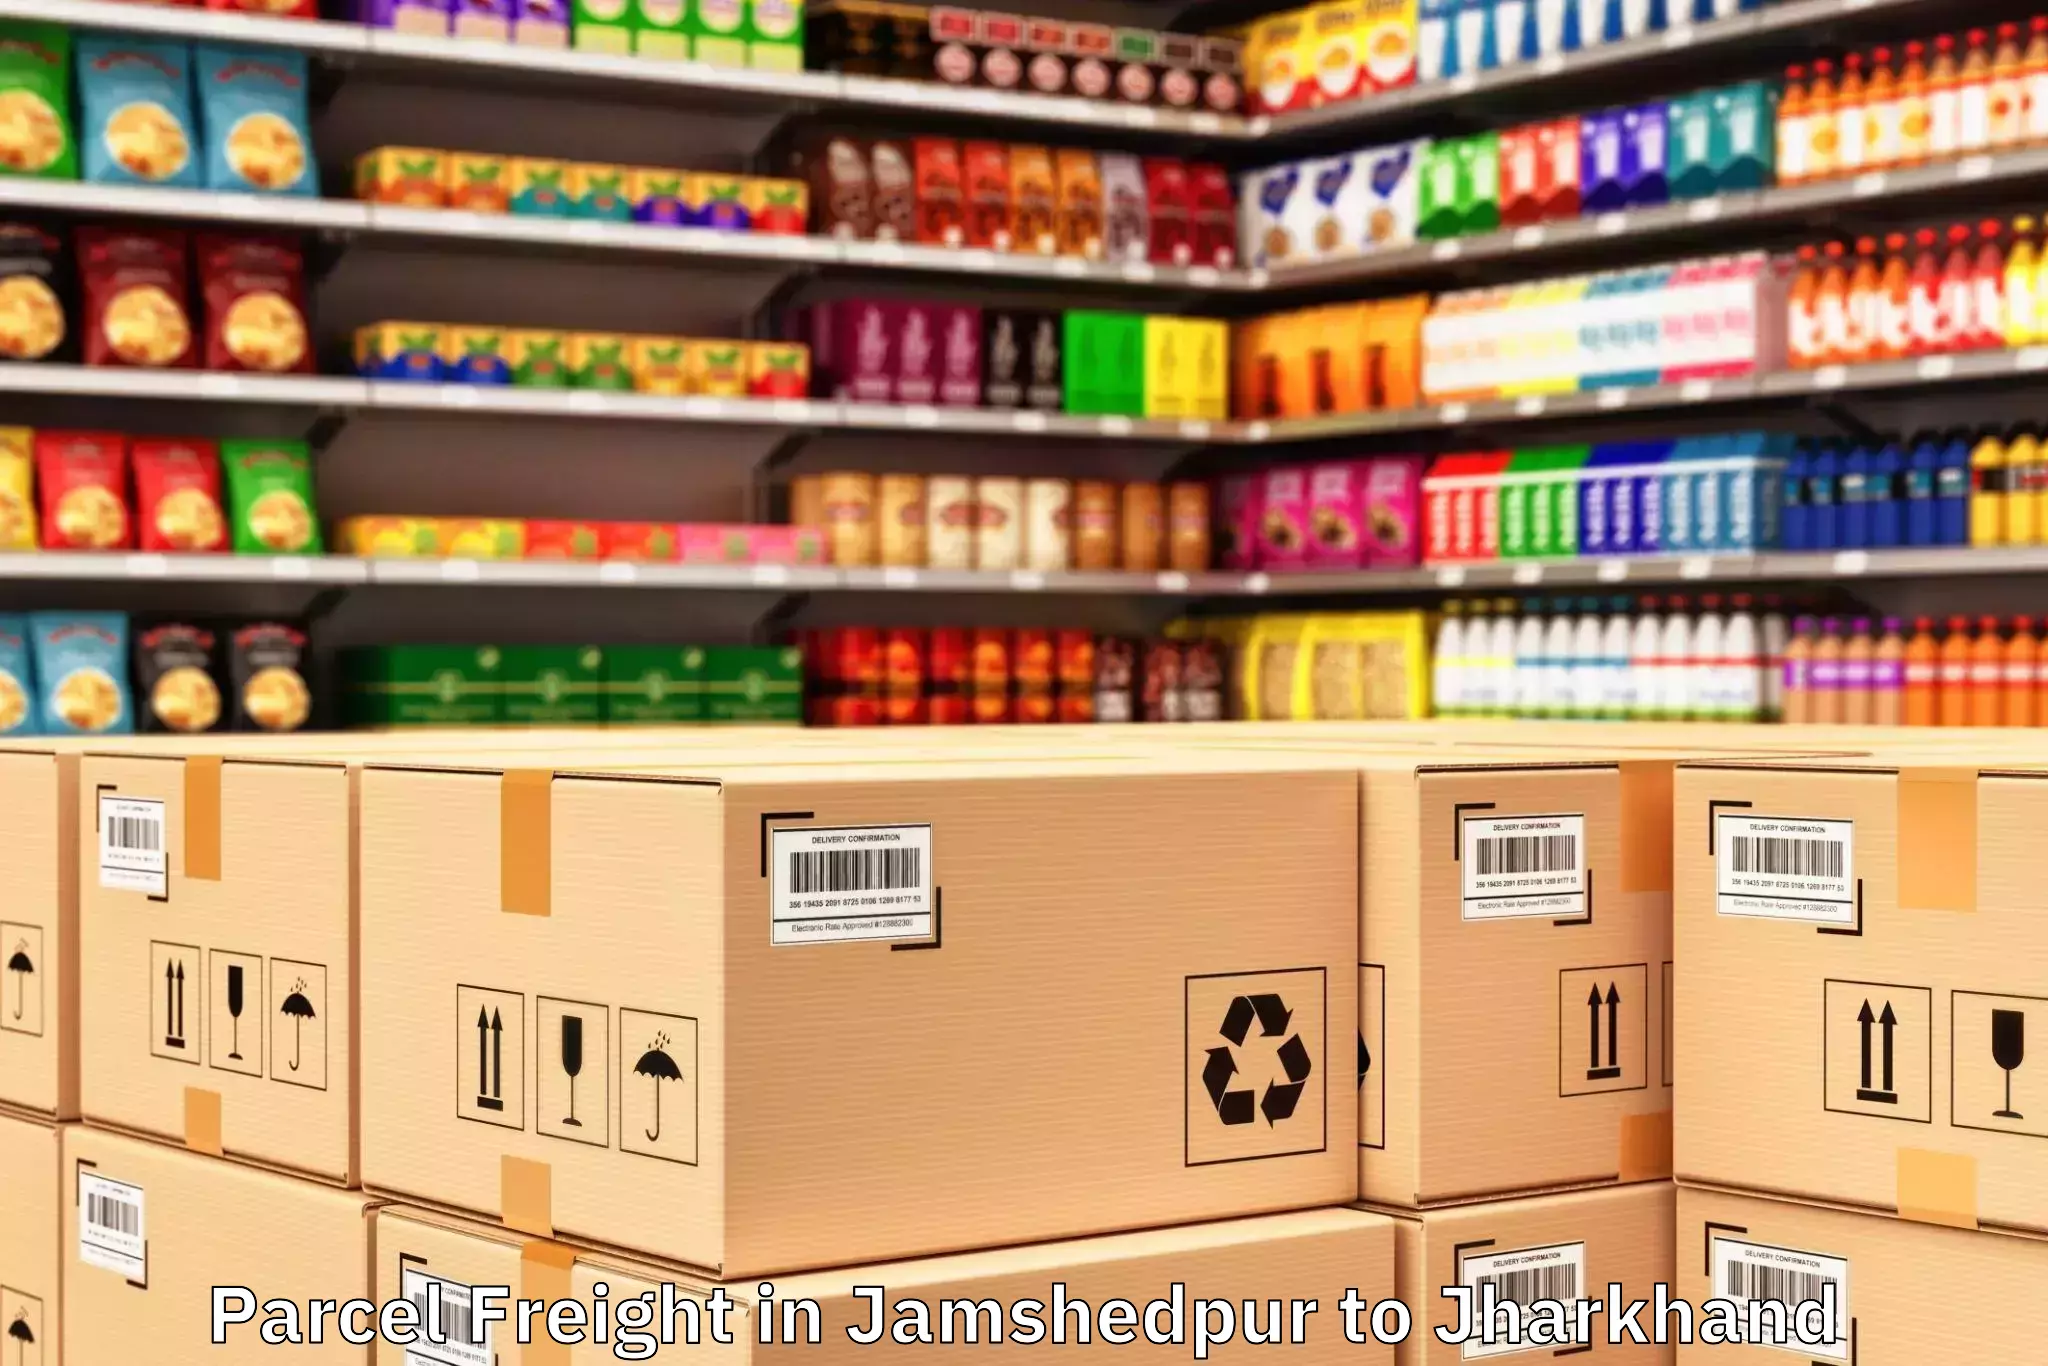 Easy Jamshedpur to Ranchi University Ranchi Parcel Freight Booking